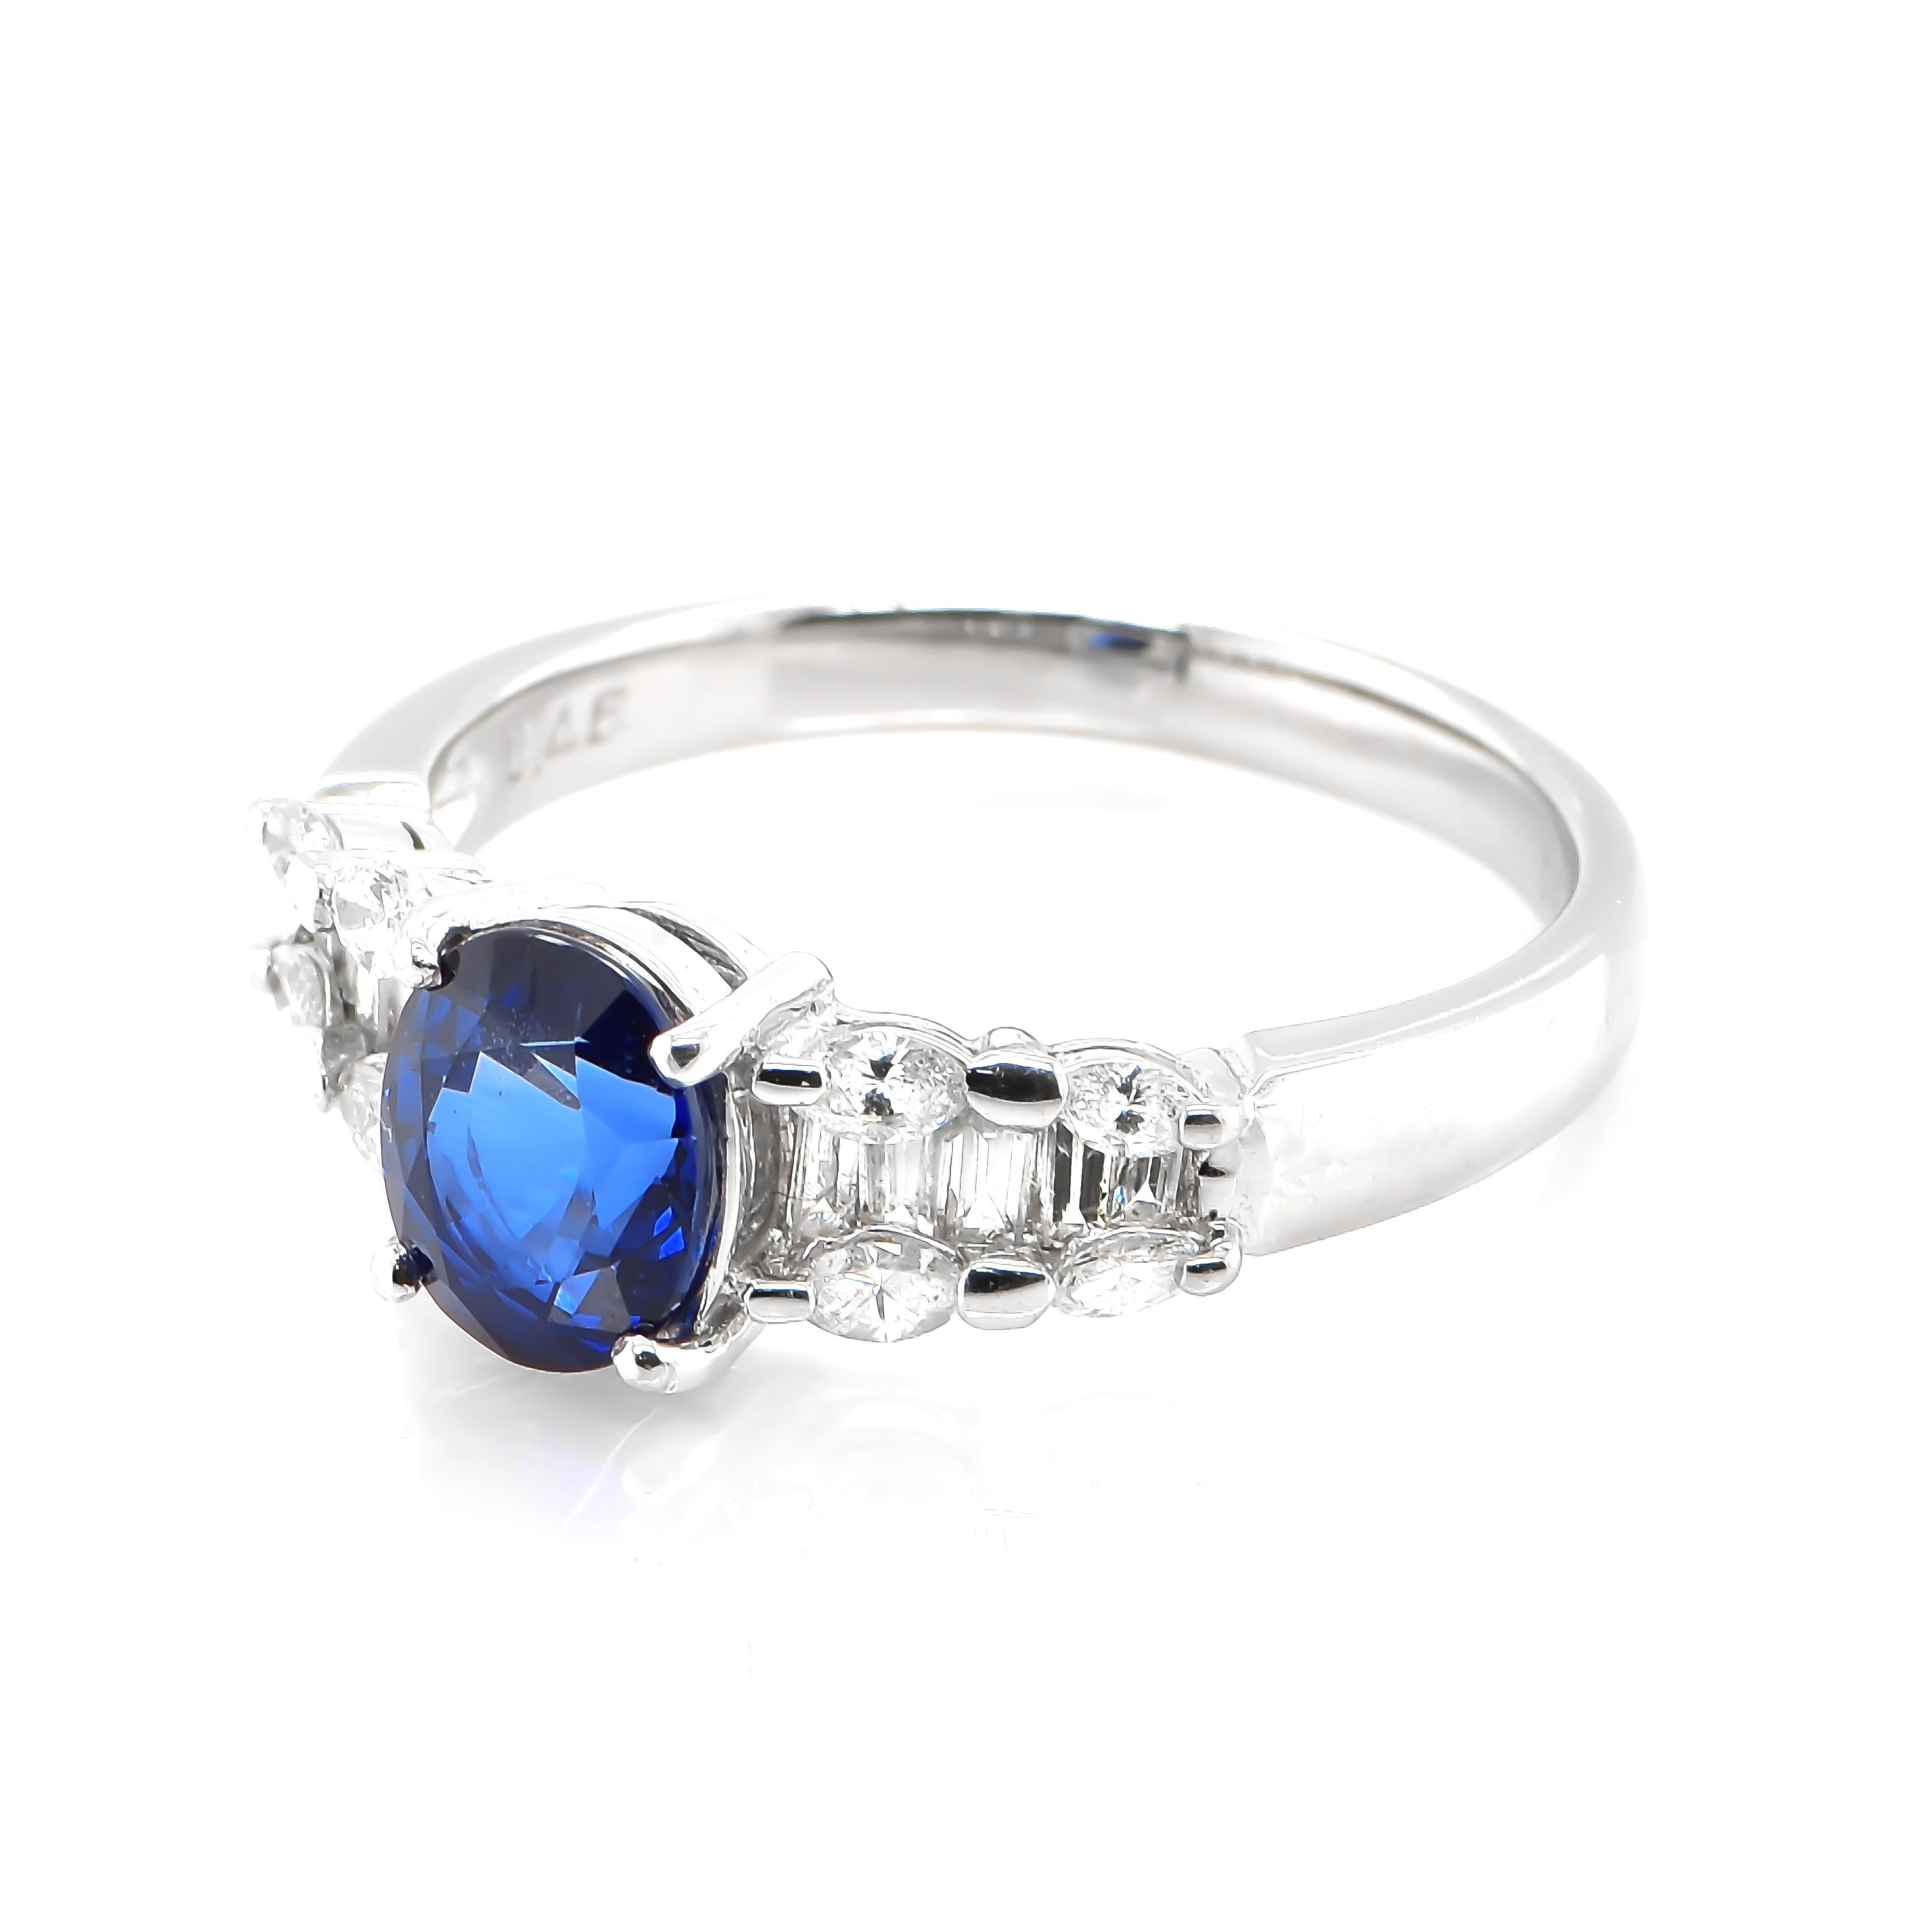 Modern 1.61 Carat Natural Royal Blue Sapphire and Diamond Ring Made in Platinum For Sale